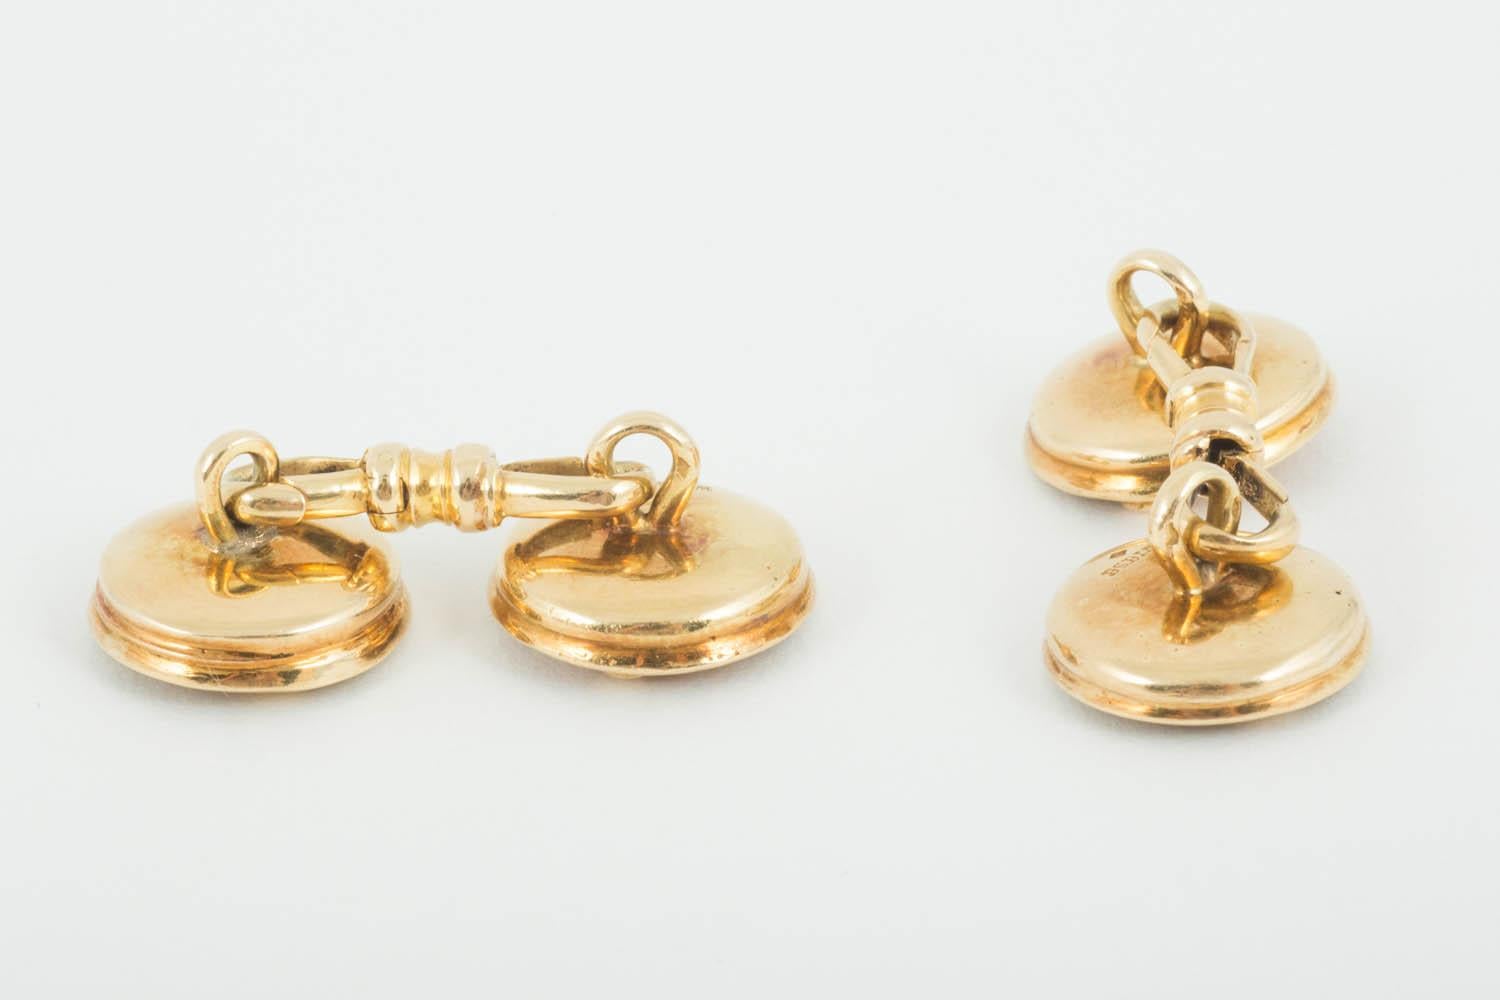 Cufflinks 18 Karat Gold Concave with Theological Scenes, Jules Wiese Paris, 1870 In Excellent Condition For Sale In London, GB